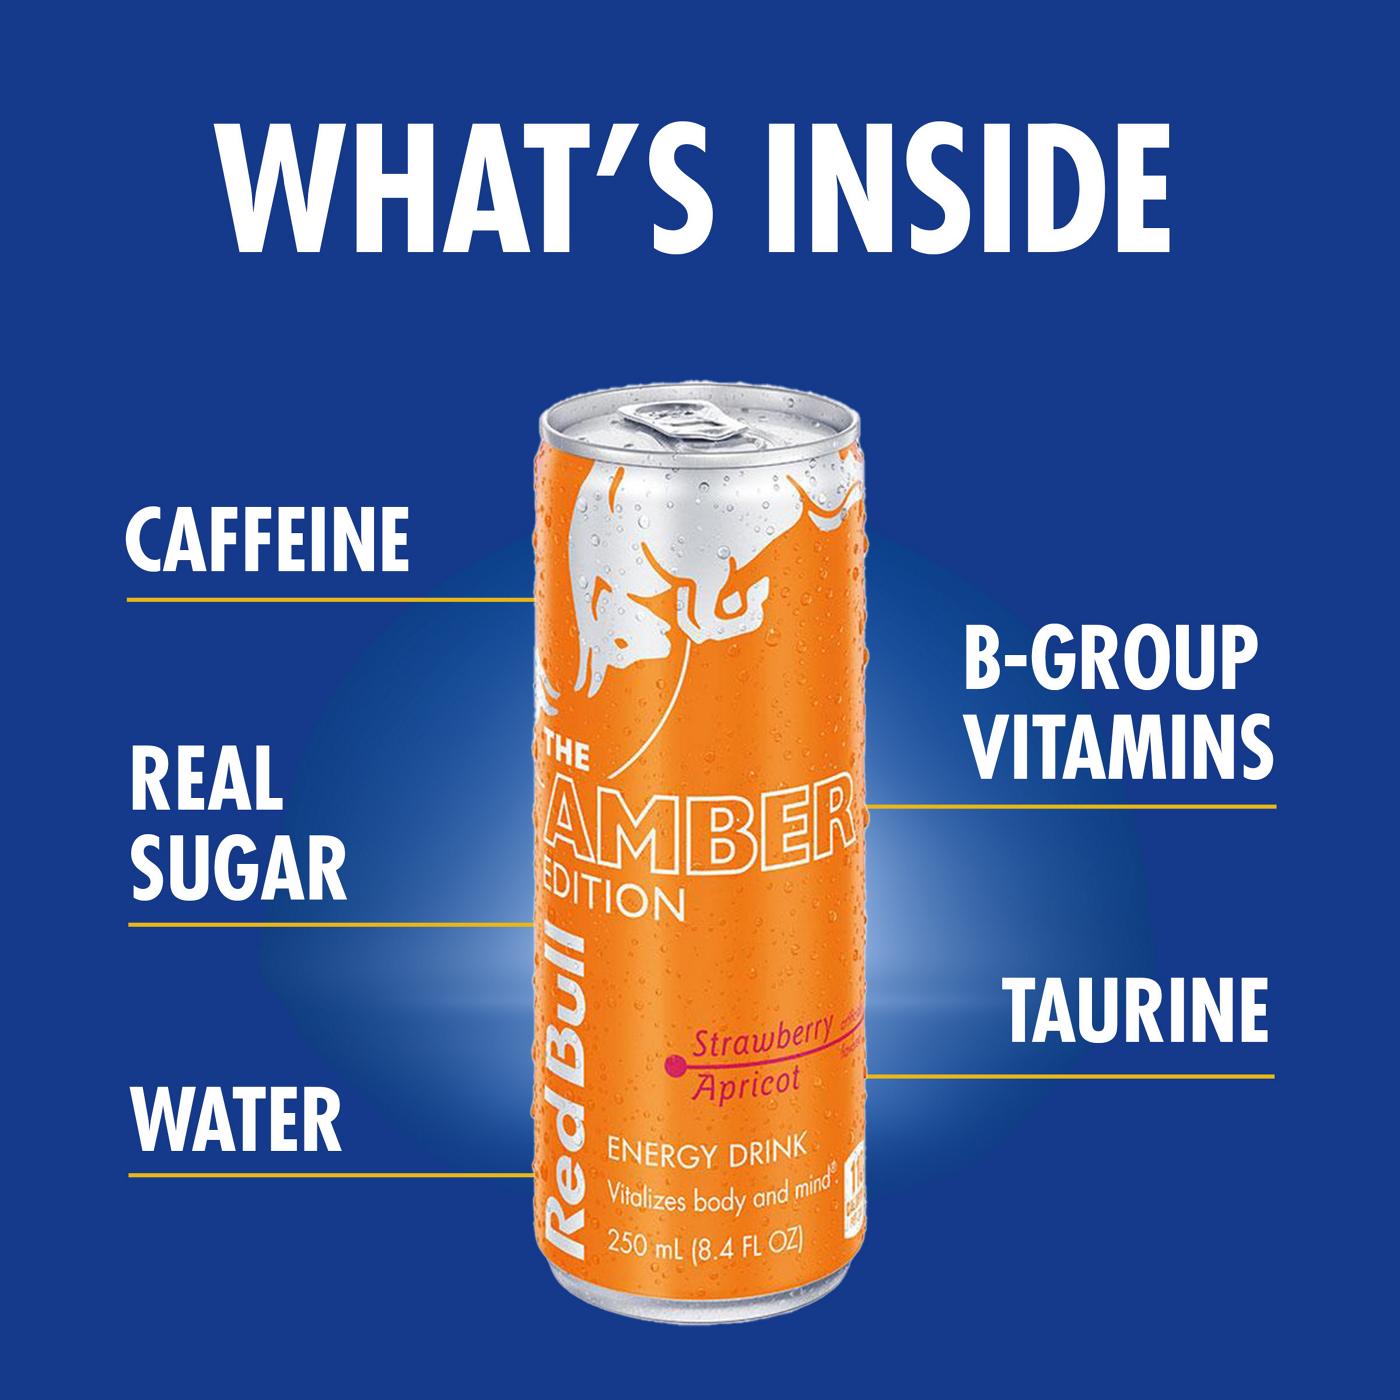 Red Bull The Amber Edition Strawberry Apricot Energy Drink 4 pk Cans; image 2 of 7